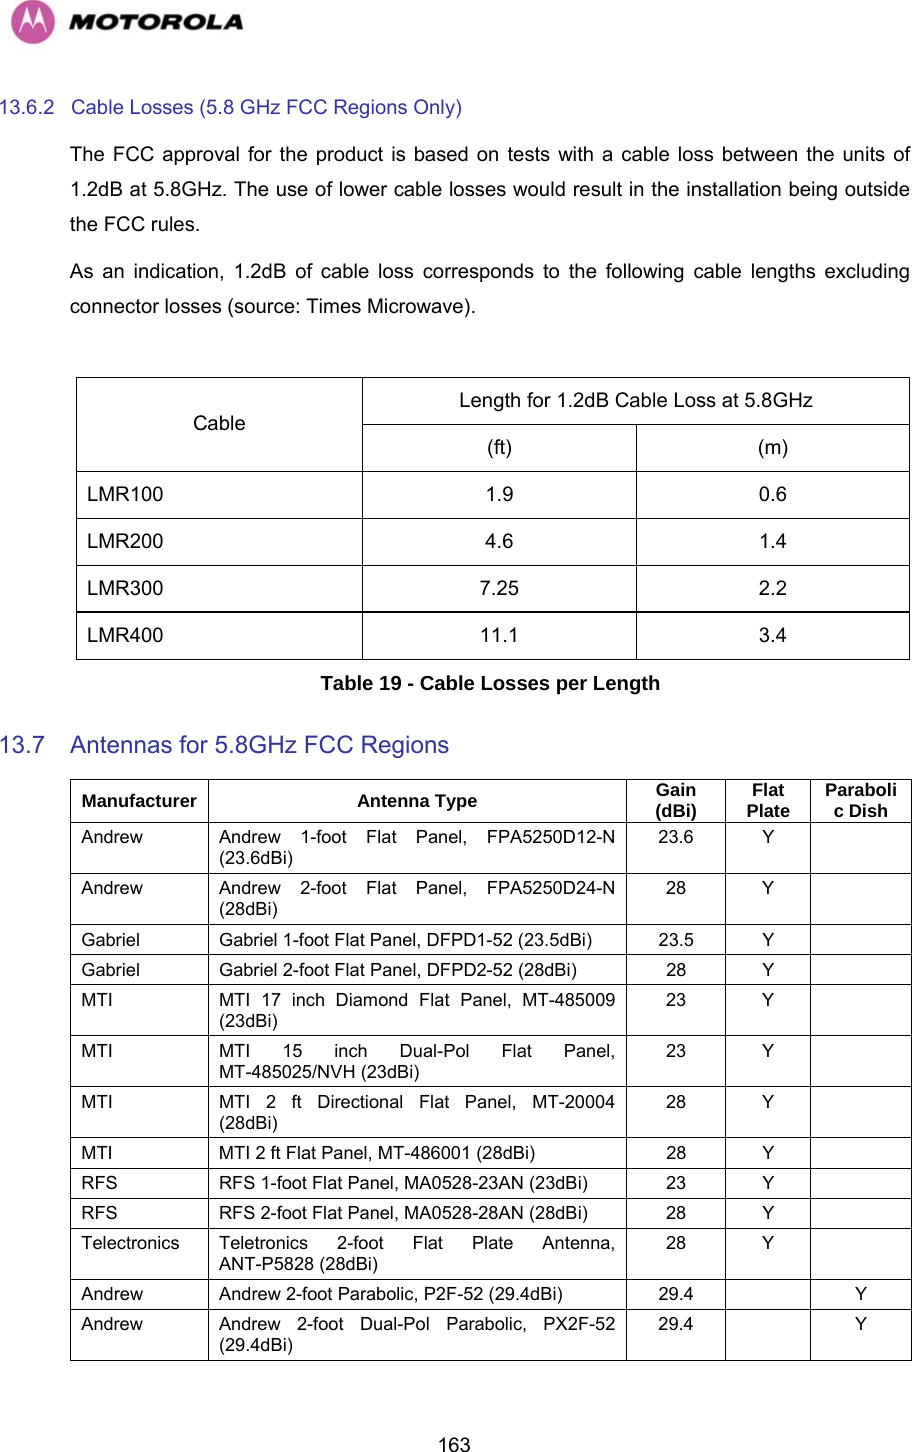   16313.6.2  Cable Losses (5.8 GHz FCC Regions Only) The FCC approval for the product is based on tests with a cable loss between the units of 1.2dB at 5.8GHz. The use of lower cable losses would result in the installation being outside the FCC rules. As an indication, 1.2dB of cable loss corresponds to the following cable lengths excluding connector losses (source: Times Microwave).  Length for 1.2dB Cable Loss at 5.8GHz Cable (ft) (m) LMR100 1.9 0.6 LMR200 4.6 1.4 LMR300 7.25 2.2 LMR400 11.1 3.4 Table 19 - Cable Losses per Length 13.7  Antennas for 5.8GHz FCC Regions Manufacturer Antenna Type  Gain (dBi)  Flat Plate  Parabolic Dish Andrew  Andrew 1-foot Flat Panel, FPA5250D12-N (23.6dBi) 23.6 Y   Andrew  Andrew 2-foot Flat Panel, FPA5250D24-N (28dBi) 28 Y   Gabriel  Gabriel 1-foot Flat Panel, DFPD1-52 (23.5dBi)  23.5  Y   Gabriel  Gabriel 2-foot Flat Panel, DFPD2-52 (28dBi)  28  Y   MTI  MTI 17 inch Diamond Flat Panel, MT-485009 (23dBi) 23 Y   MTI  MTI 15 inch Dual-Pol Flat Panel, MT-485025/NVH (23dBi) 23 Y   MTI  MTI 2 ft Directional Flat Panel, MT-20004 (28dBi) 28 Y   MTI  MTI 2 ft Flat Panel, MT-486001 (28dBi)  28  Y   RFS  RFS 1-foot Flat Panel, MA0528-23AN (23dBi)  23  Y   RFS  RFS 2-foot Flat Panel, MA0528-28AN (28dBi)  28  Y   Telectronics  Teletronics 2-foot Flat Plate Antenna, ANT-P5828 (28dBi) 28 Y   Andrew Andrew 2-foot Parabolic, P2F-52 (29.4dBi)  29.4    Y Andrew  Andrew 2-foot Dual-Pol Parabolic, PX2F-52 (29.4dBi) 29.4   Y 